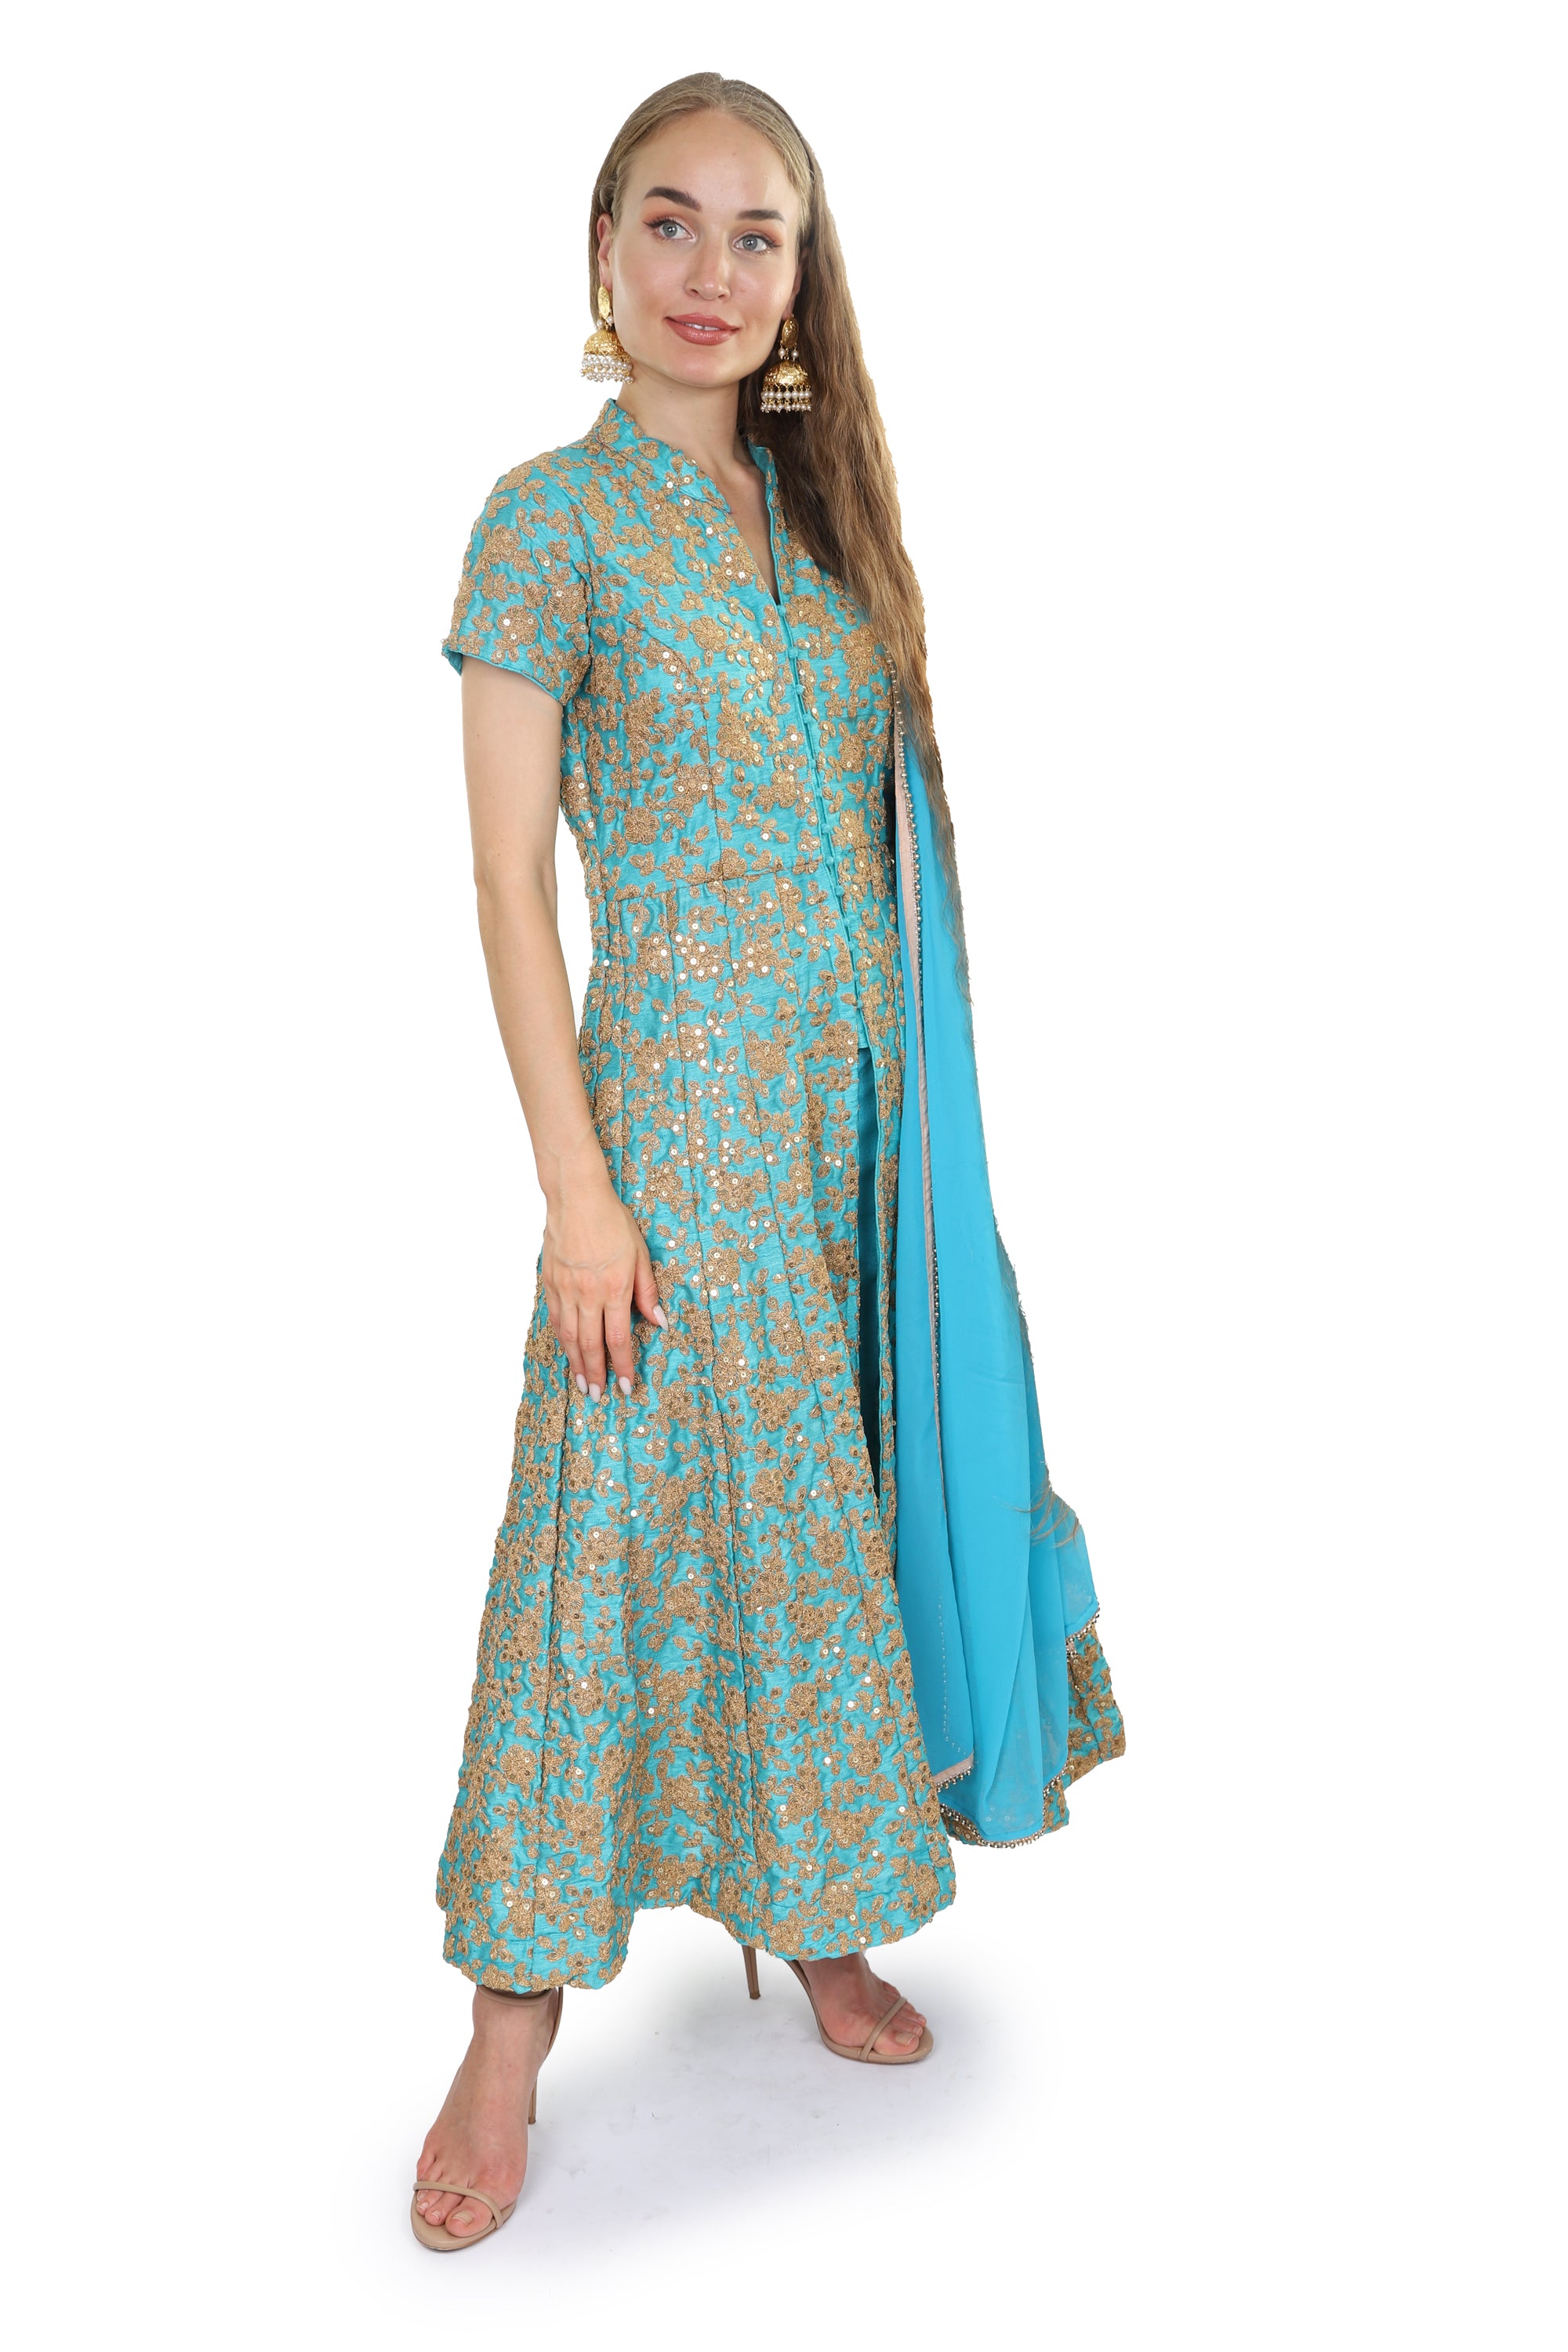 Turquoise Anarkali /fully embroidered